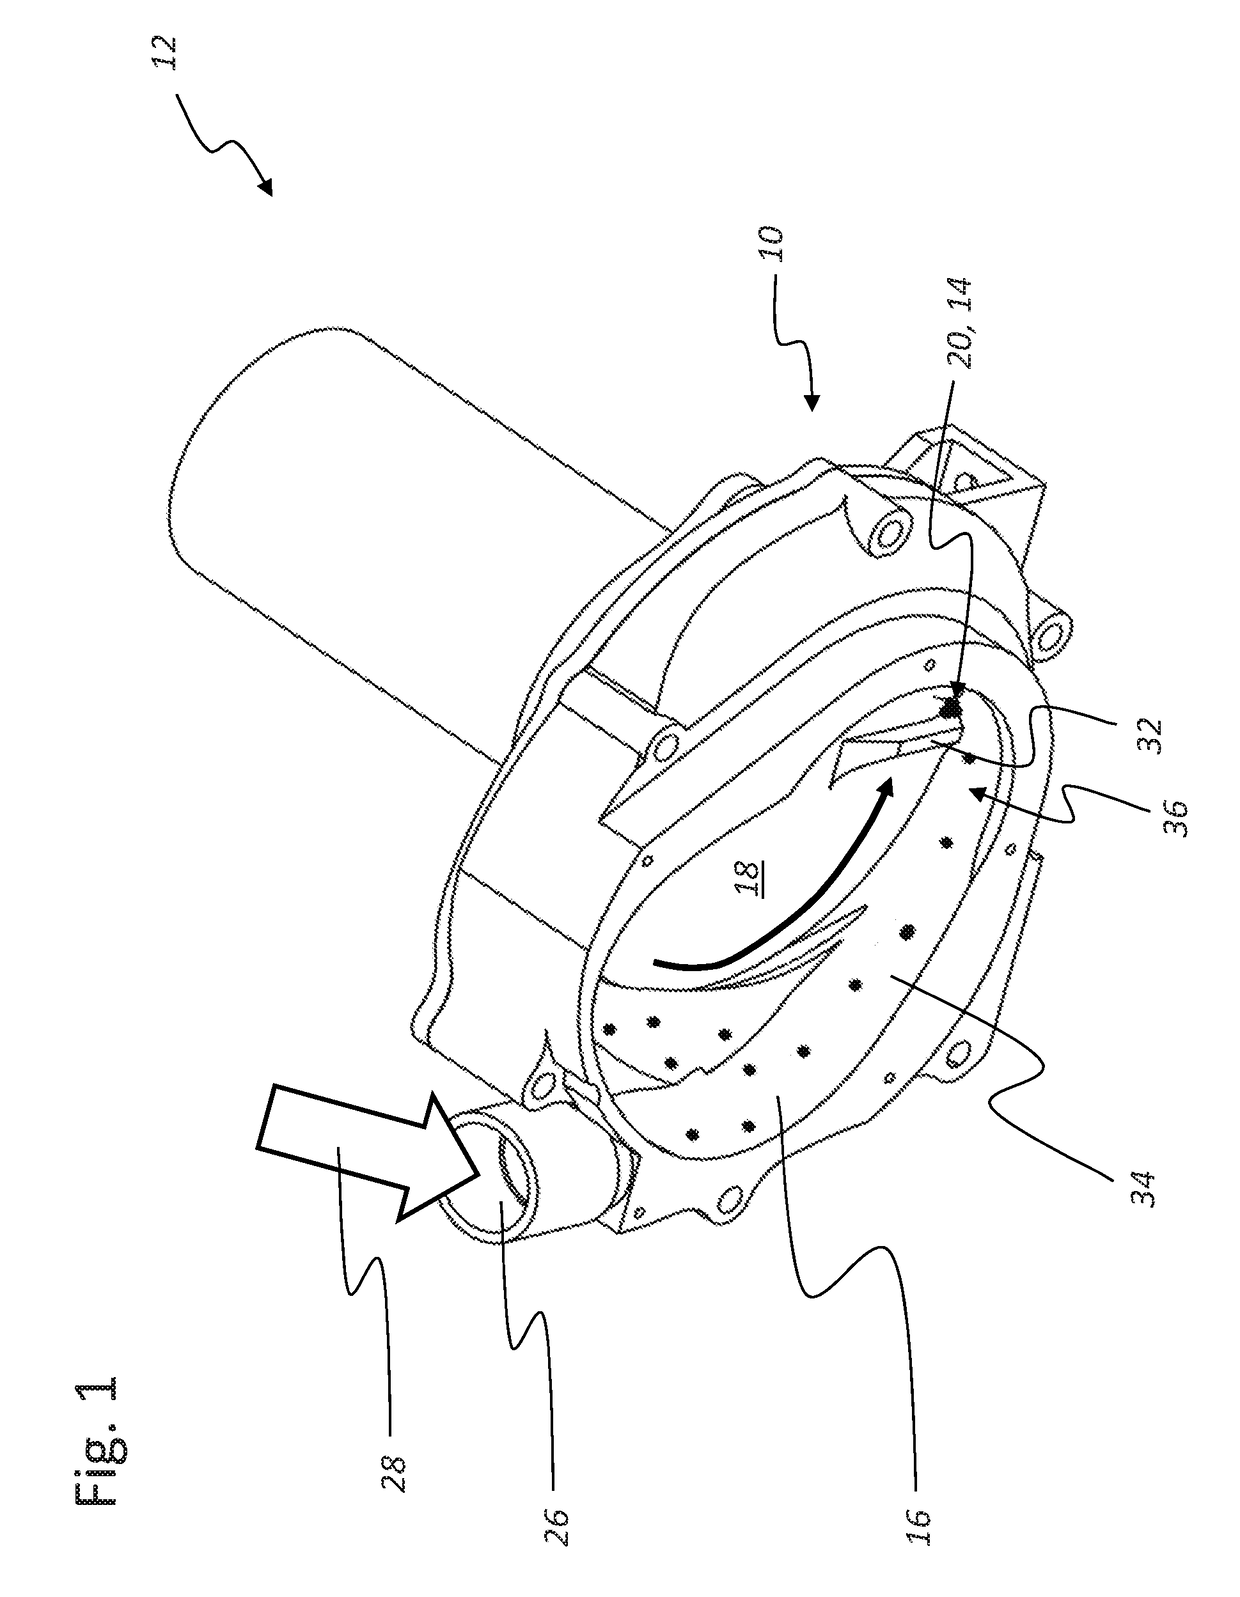 Metering disk of a distribution device for granular material